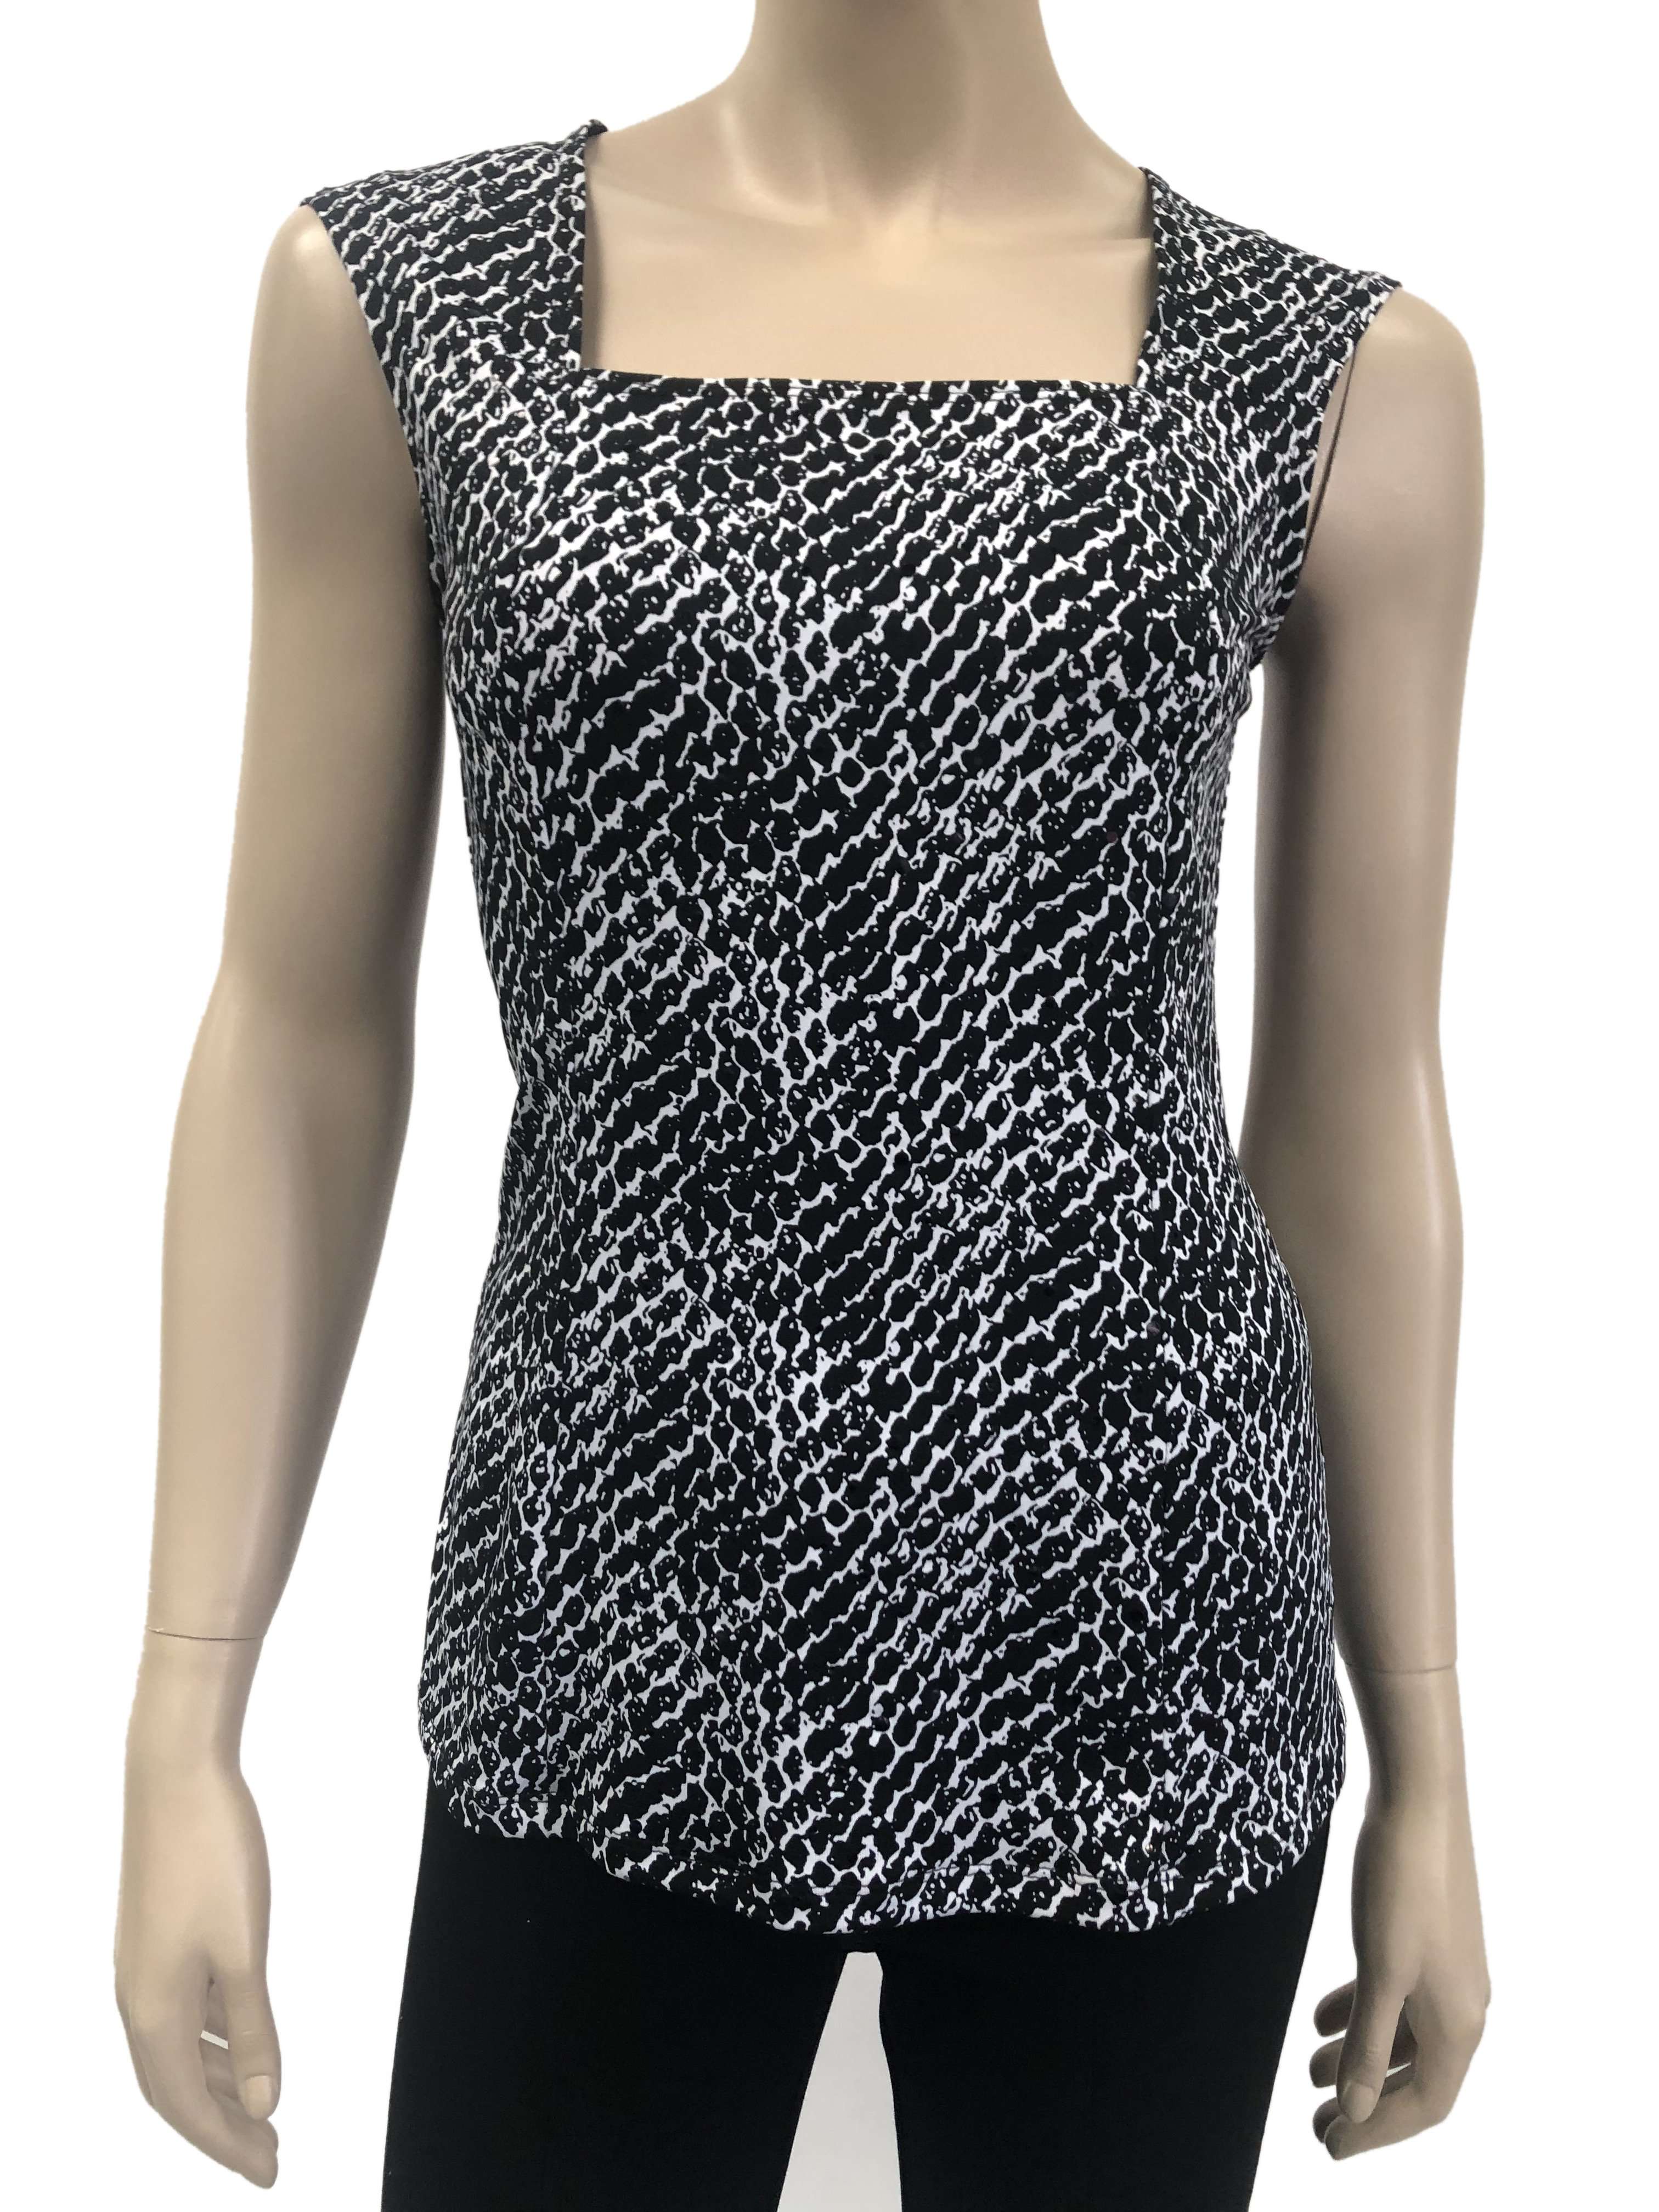 Camisole Top Black and White Elegant Top For Weddings Stretch Quality Knit Fabric Made in Canada On Sale - Yvonne Marie - Yvonne Marie